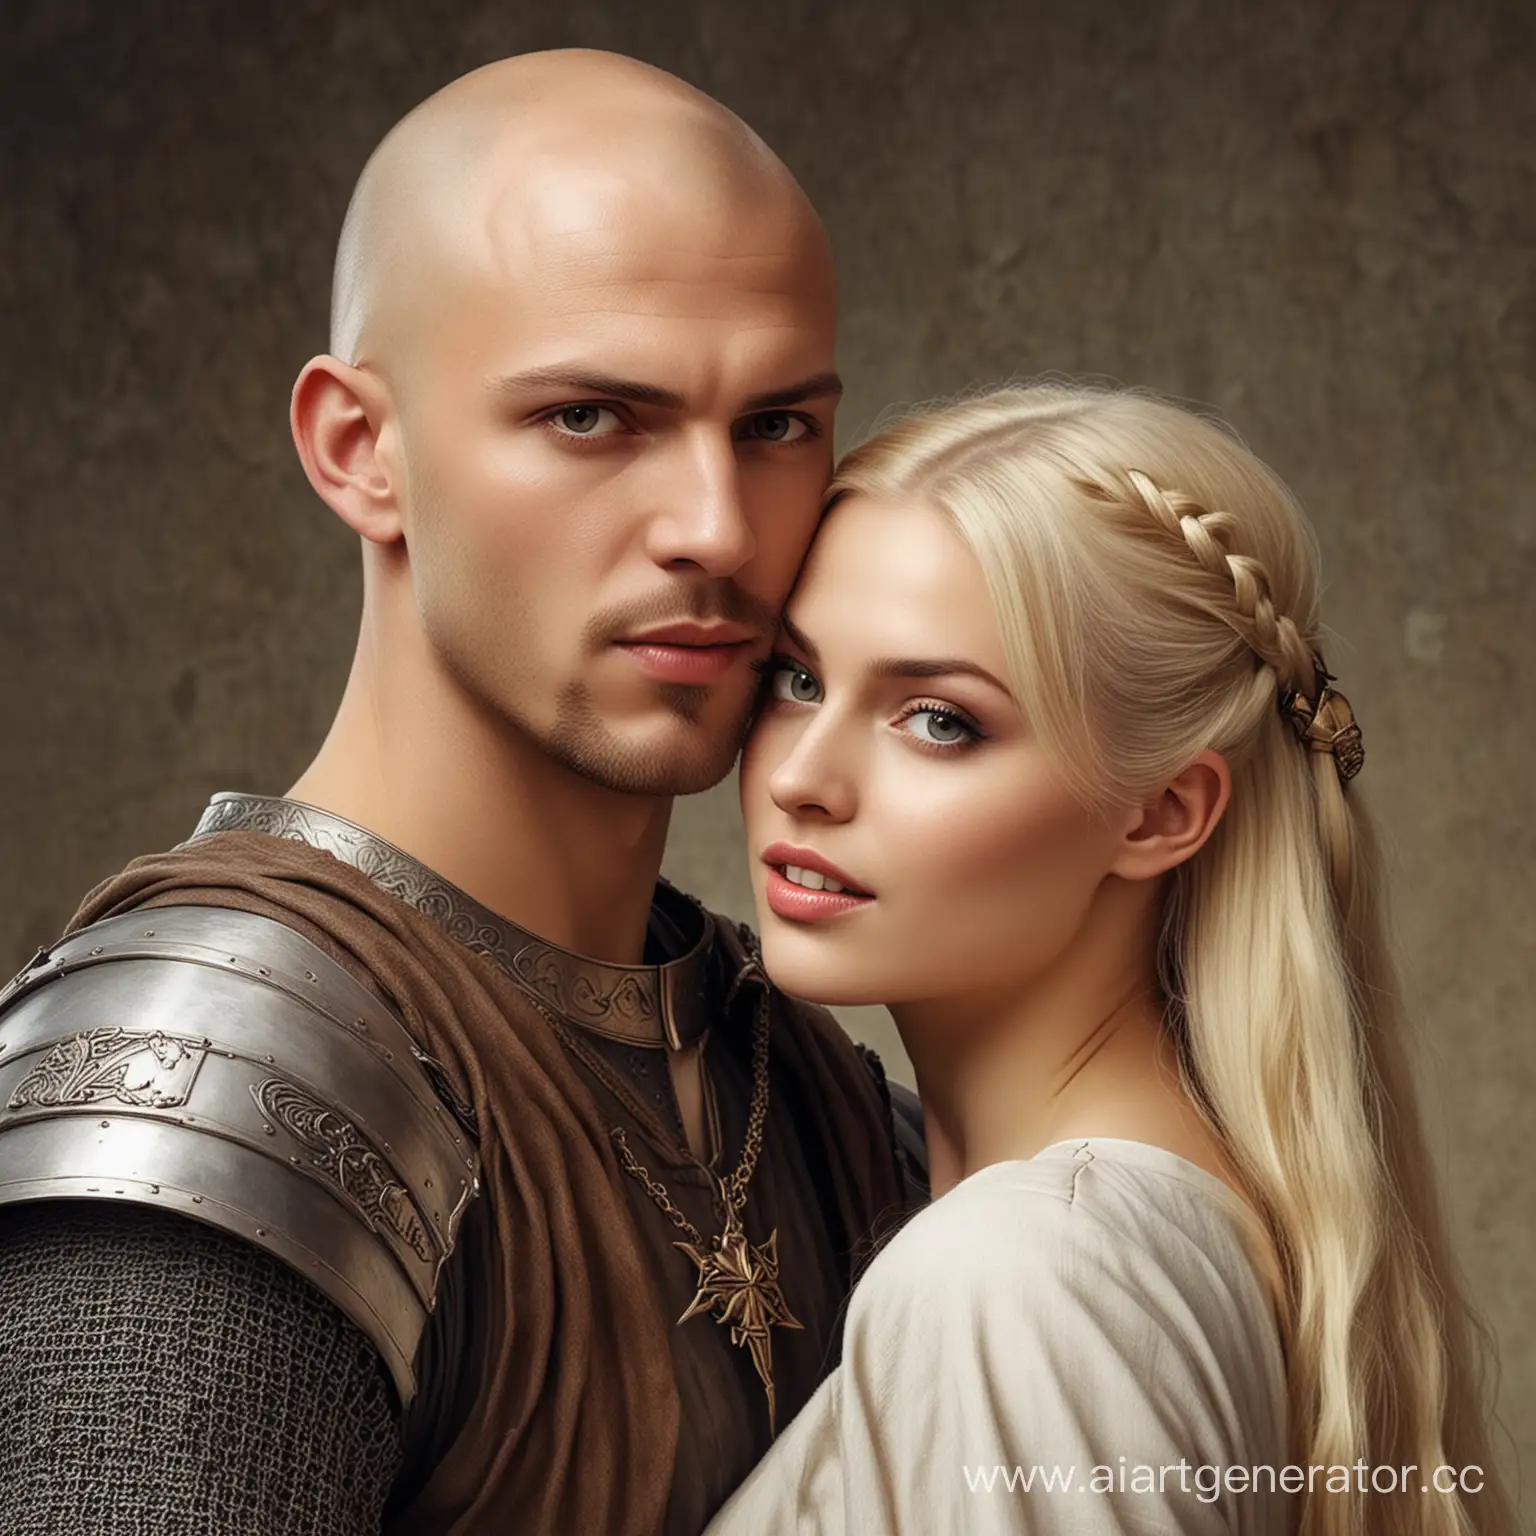 Medieval-Bald-Man-and-Blonde-Woman-in-Profile-Portrait